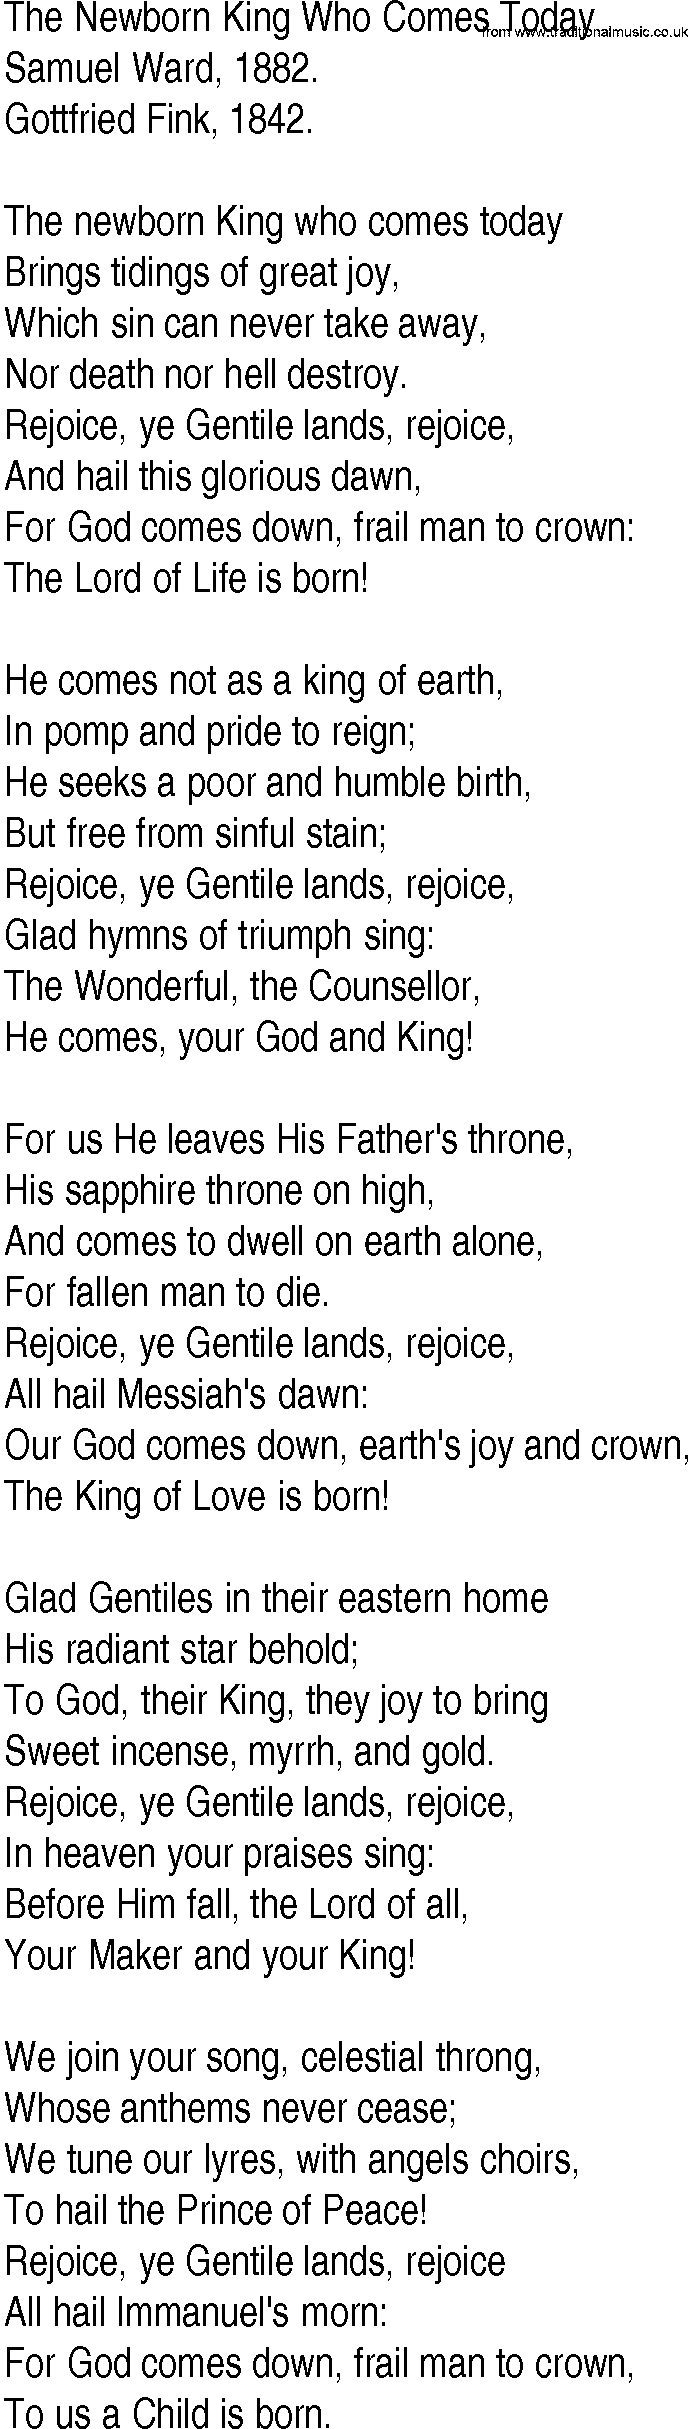 Hymn and Gospel Song: The Newborn King Who Comes Today by Samuel Ward lyrics